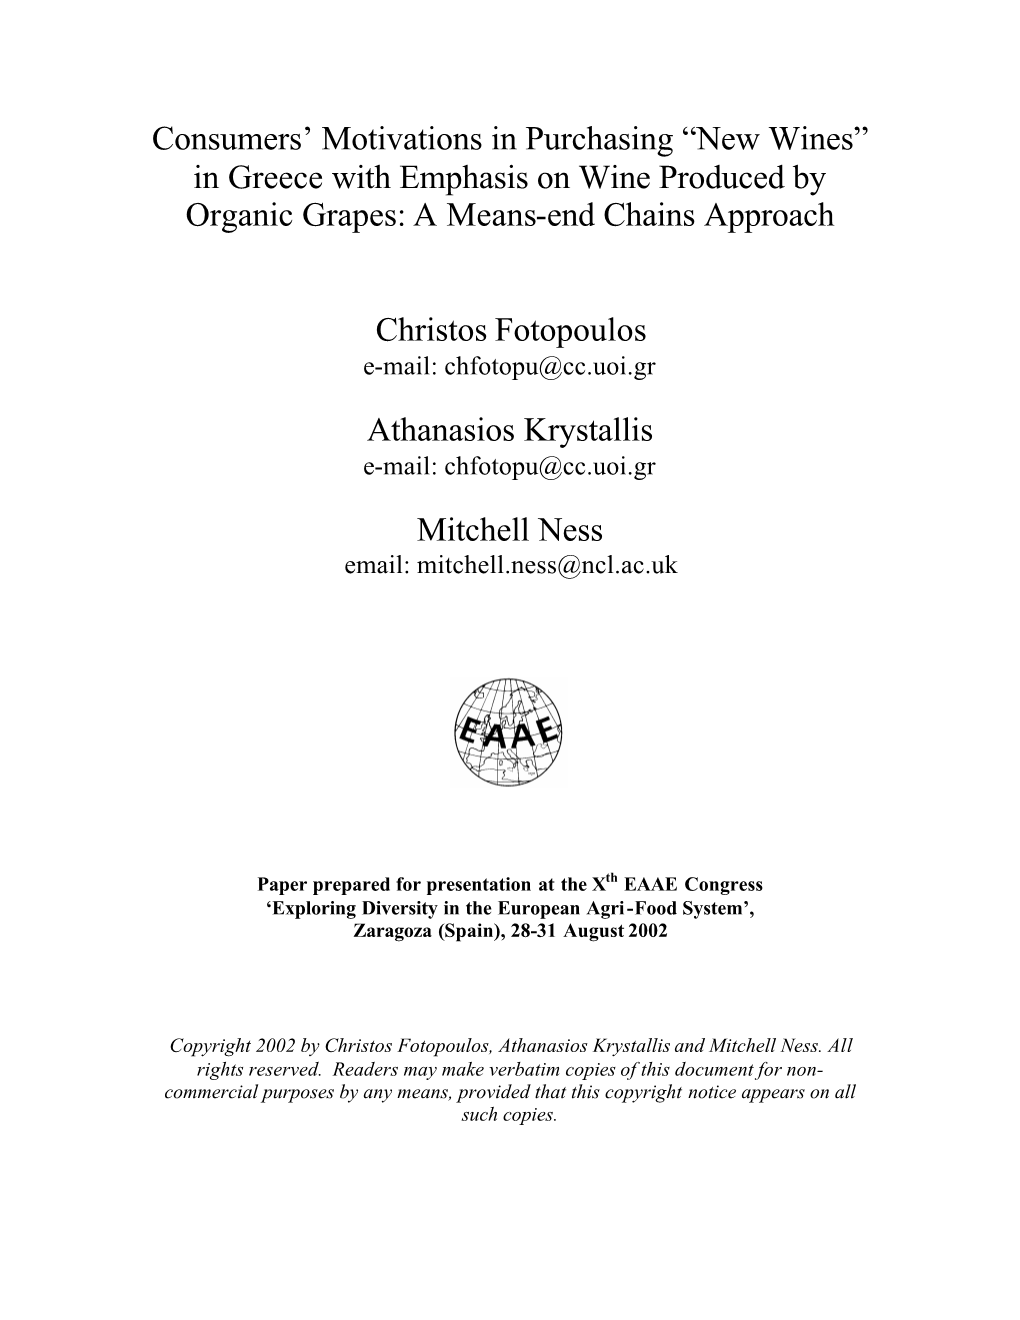 In Greece with Emphasis on Wine Produced by Organic Grapes: a Means-End Chains Approach